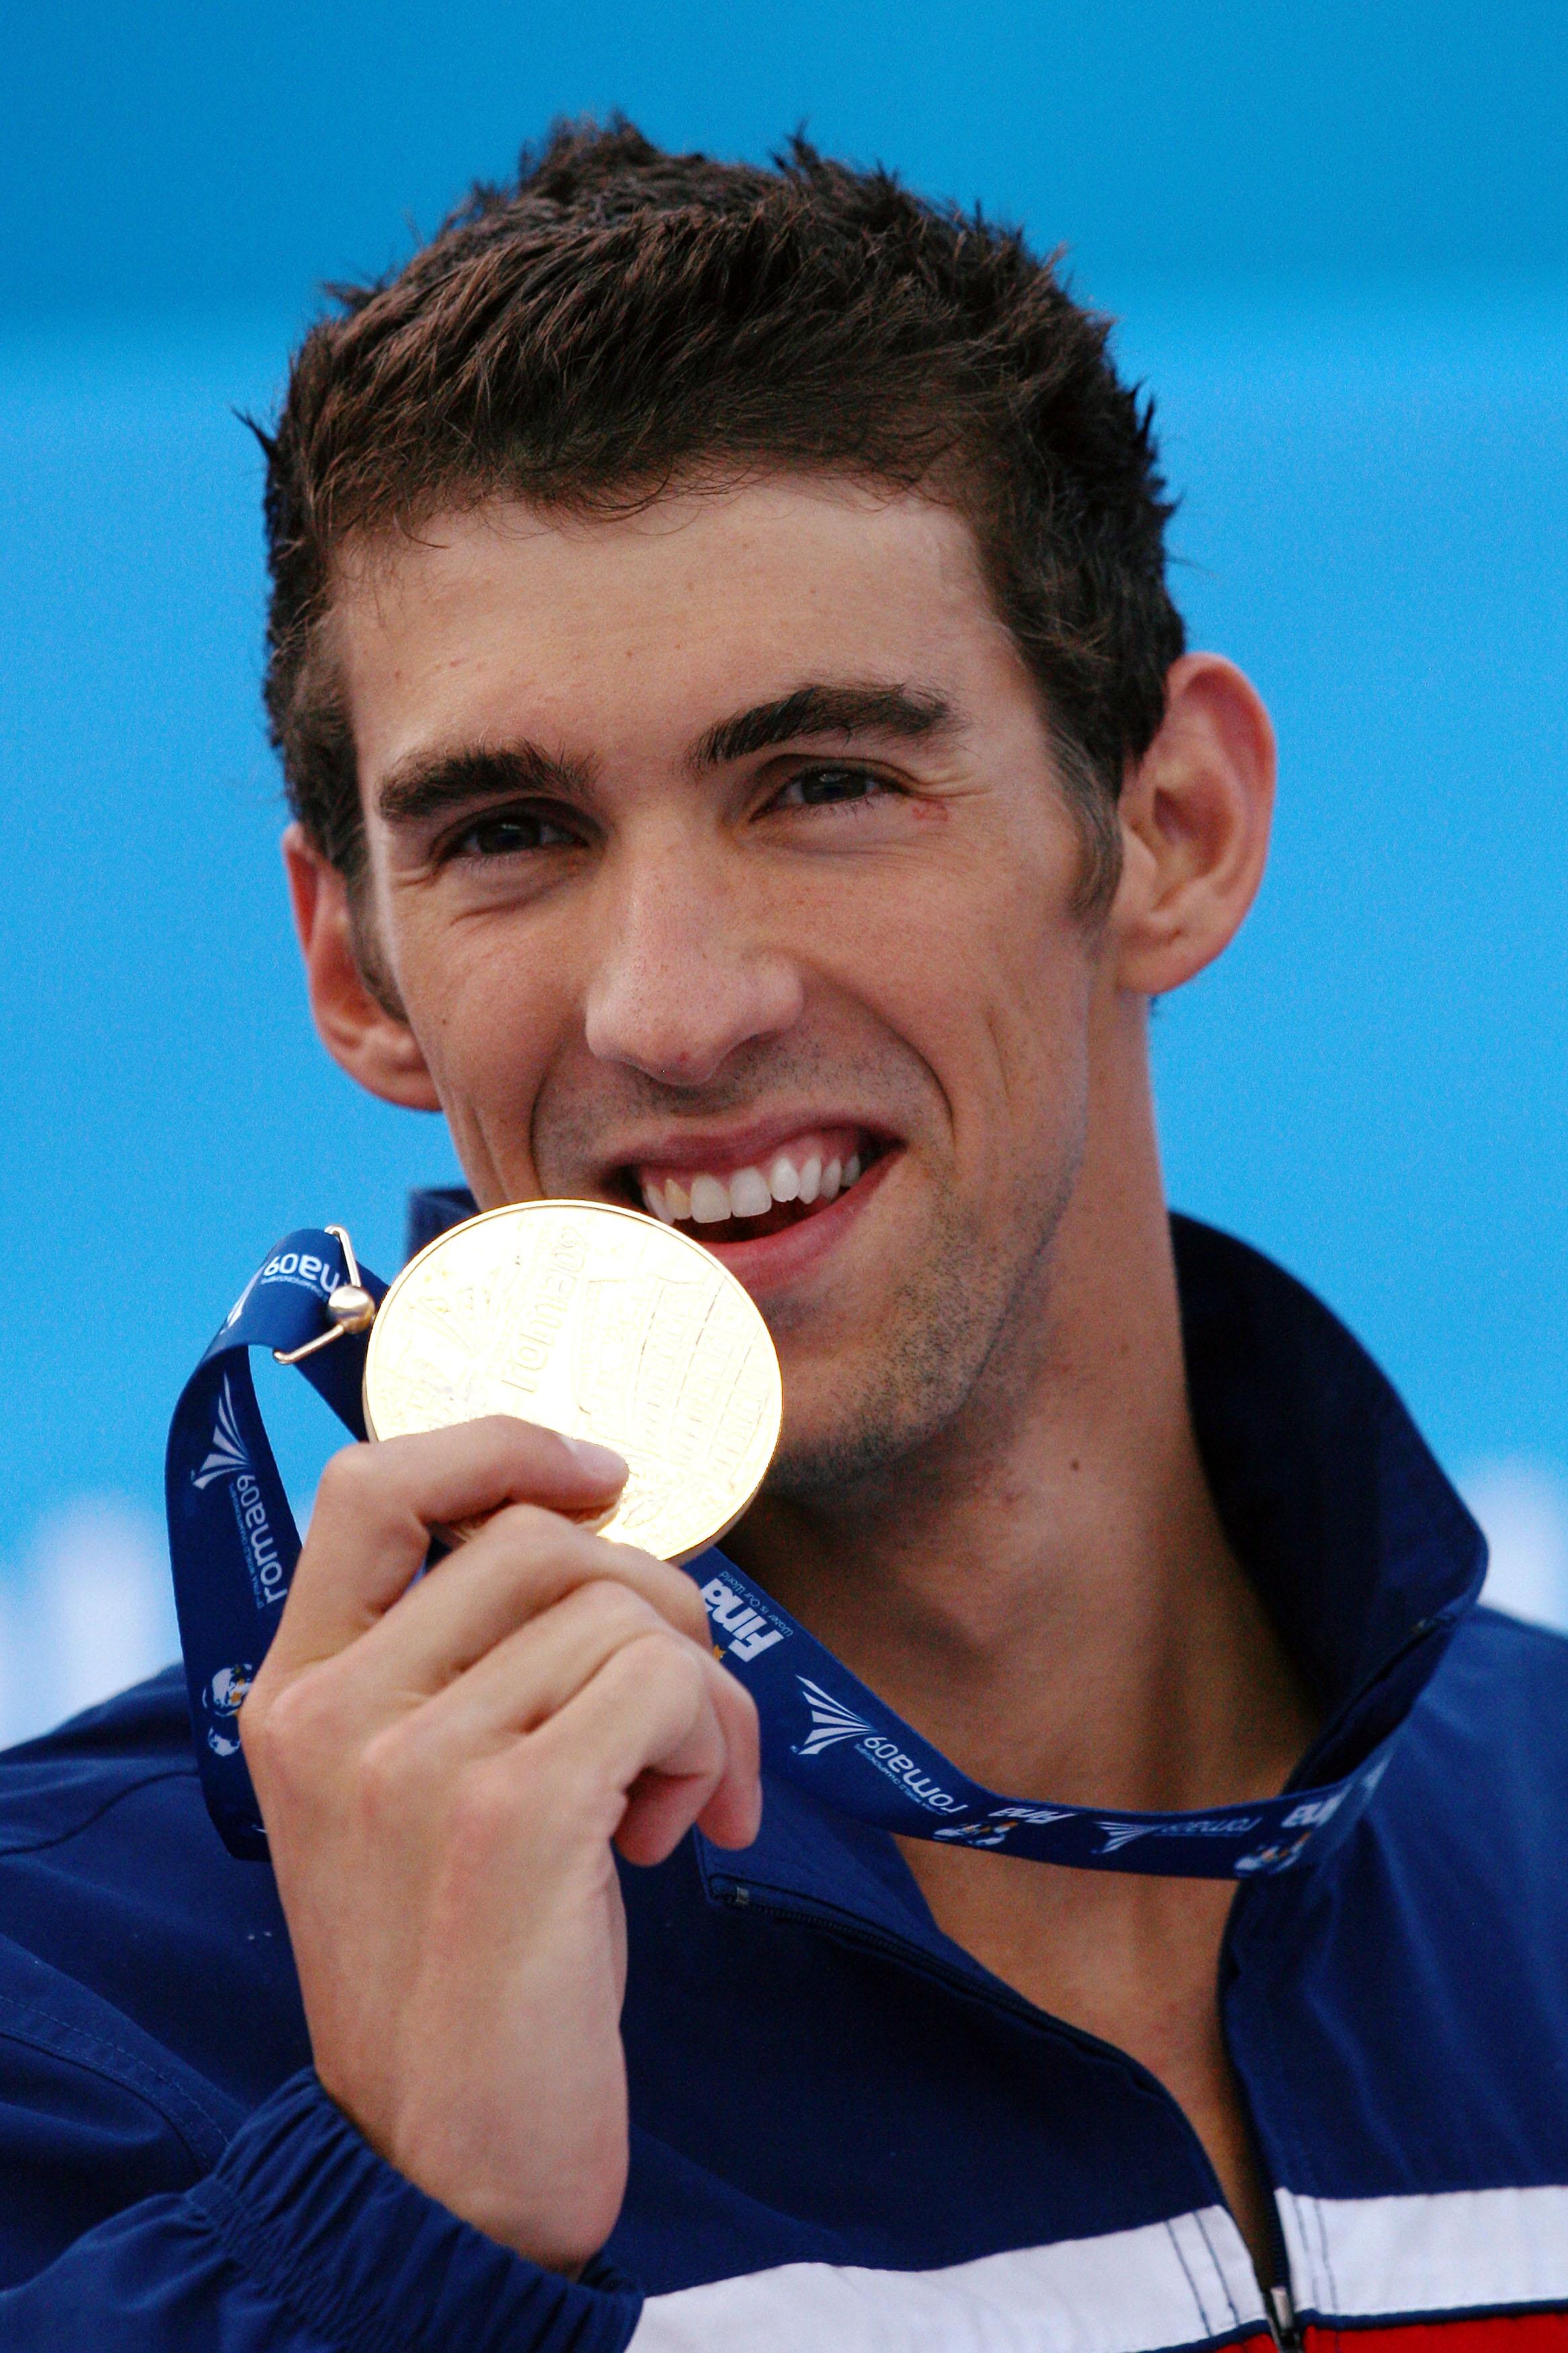 Michael Phelps Wallpaper - Michael Phelps 2009 Olympics Medals , HD Wallpaper & Backgrounds